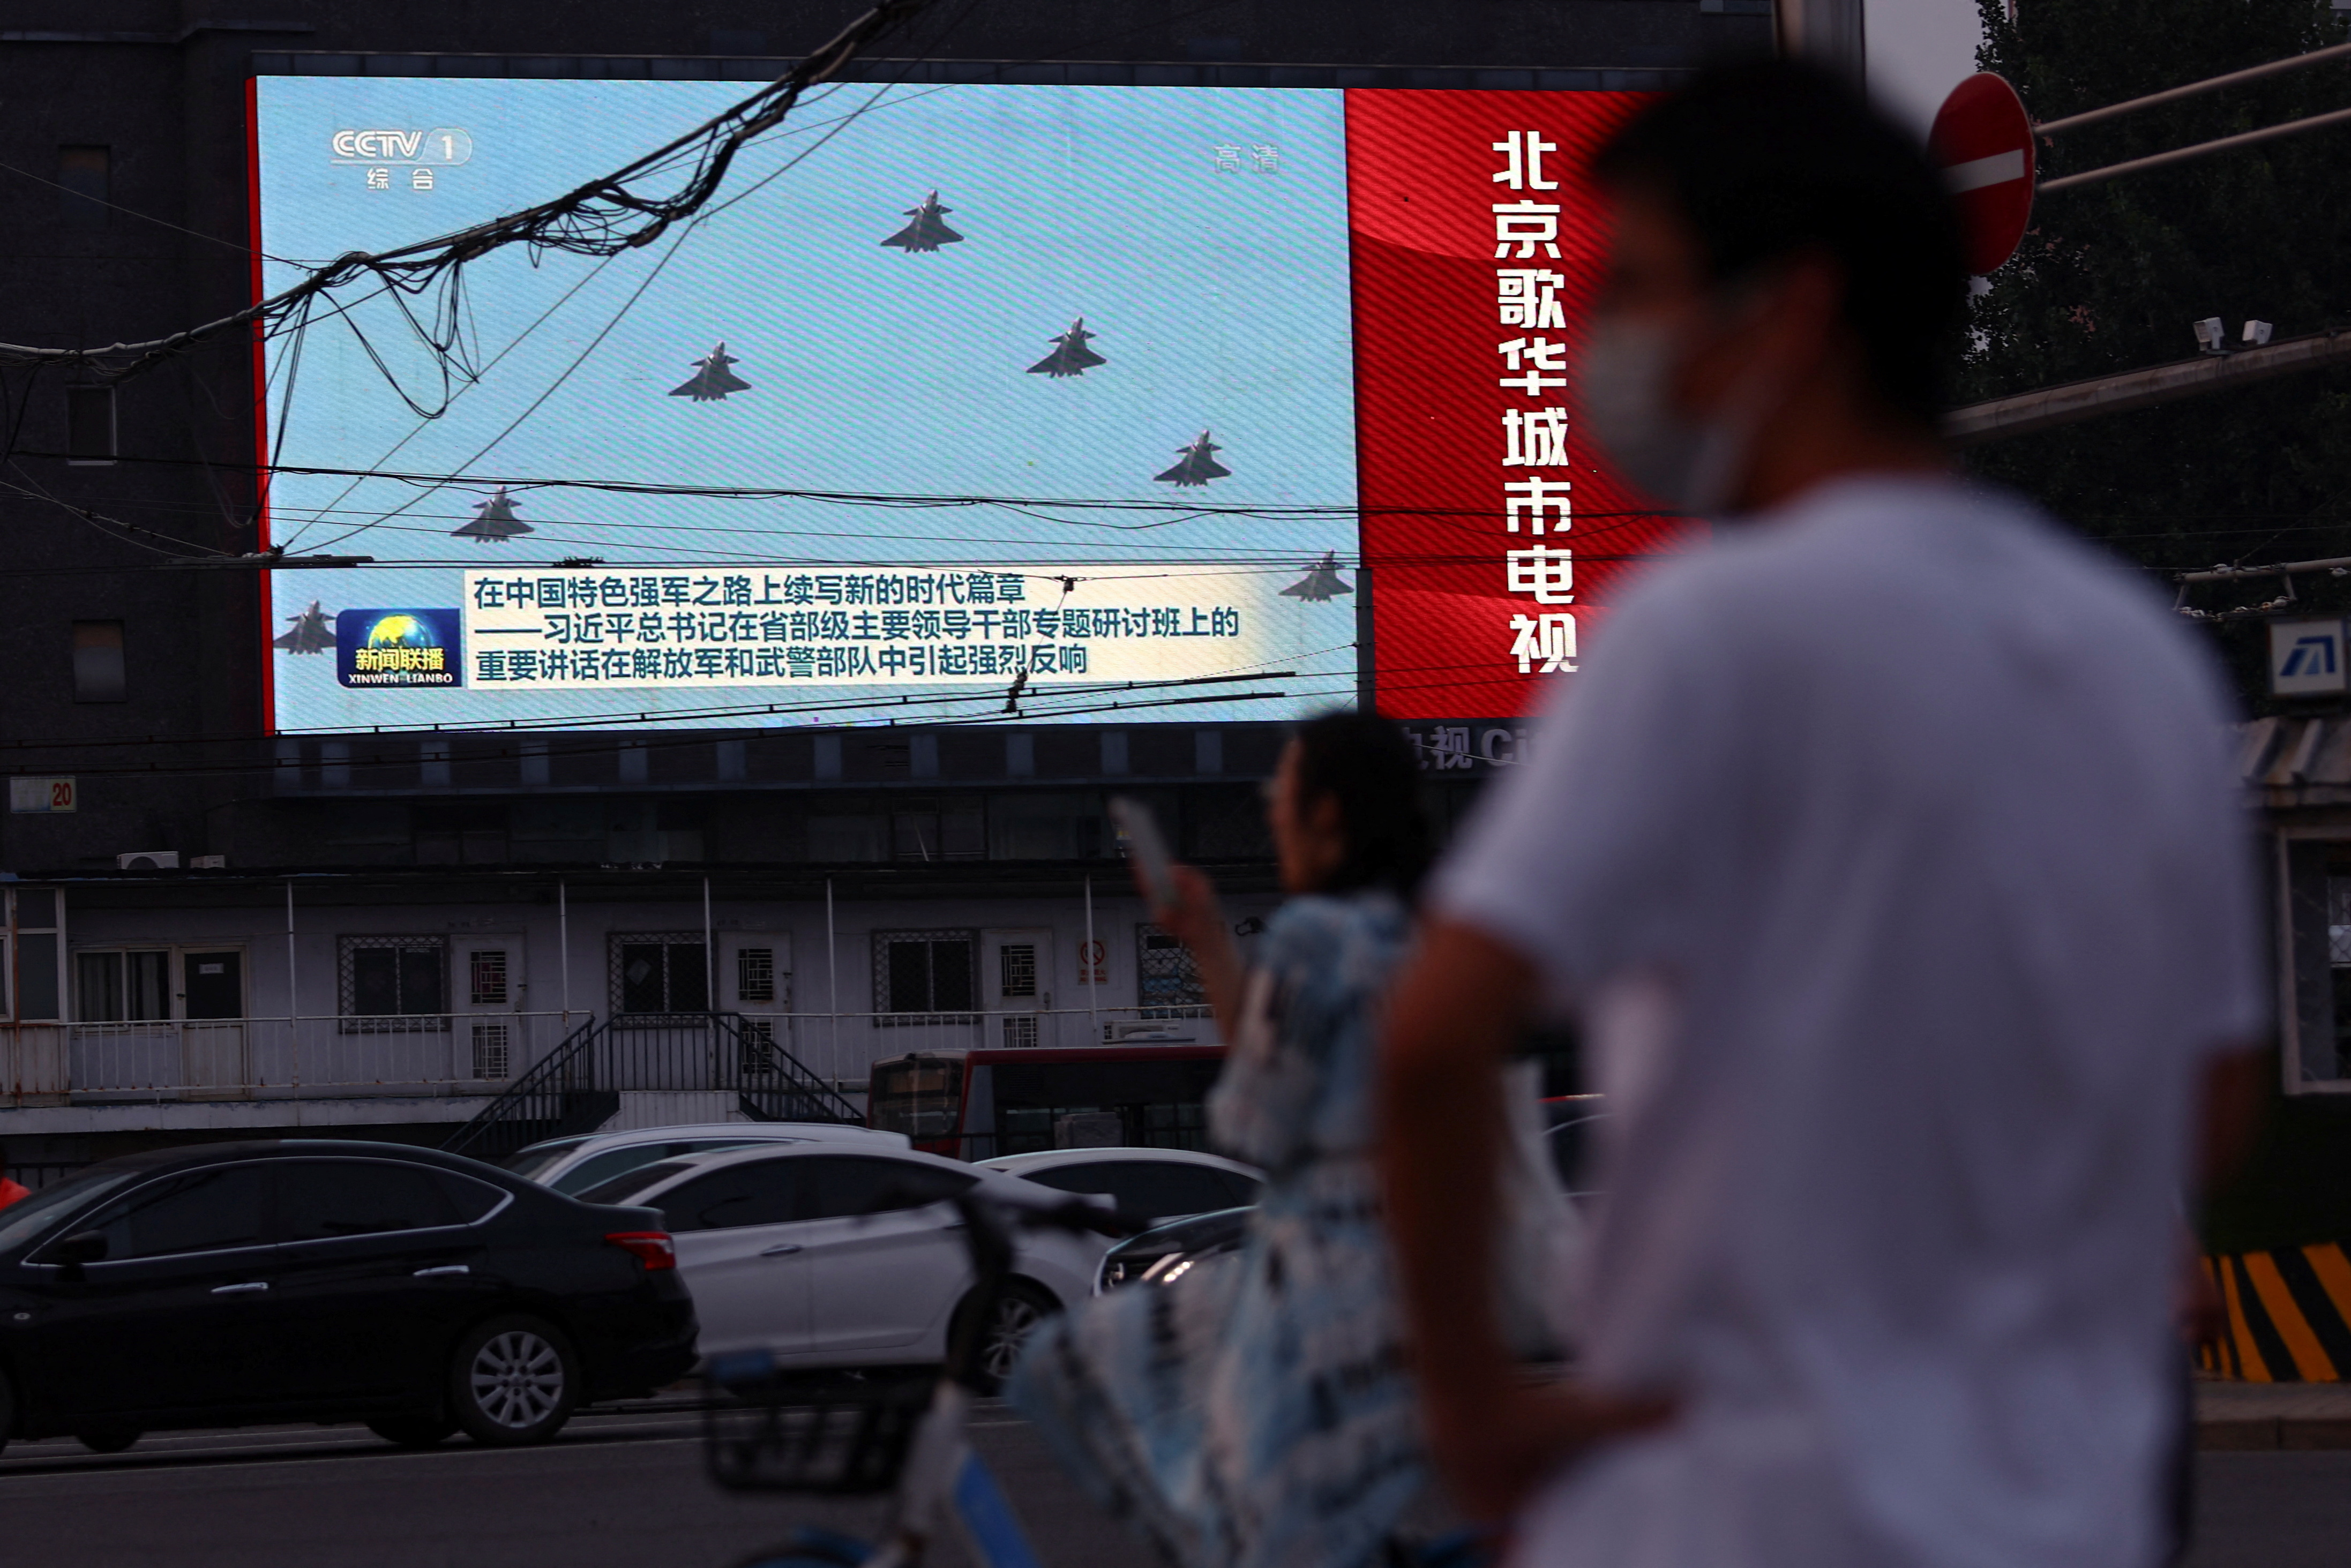 Pedestrians wait at an intersection near a screen showing footage of Chinese People's Liberation Army (PLA) aircraft during an evening news programme, in Beijing